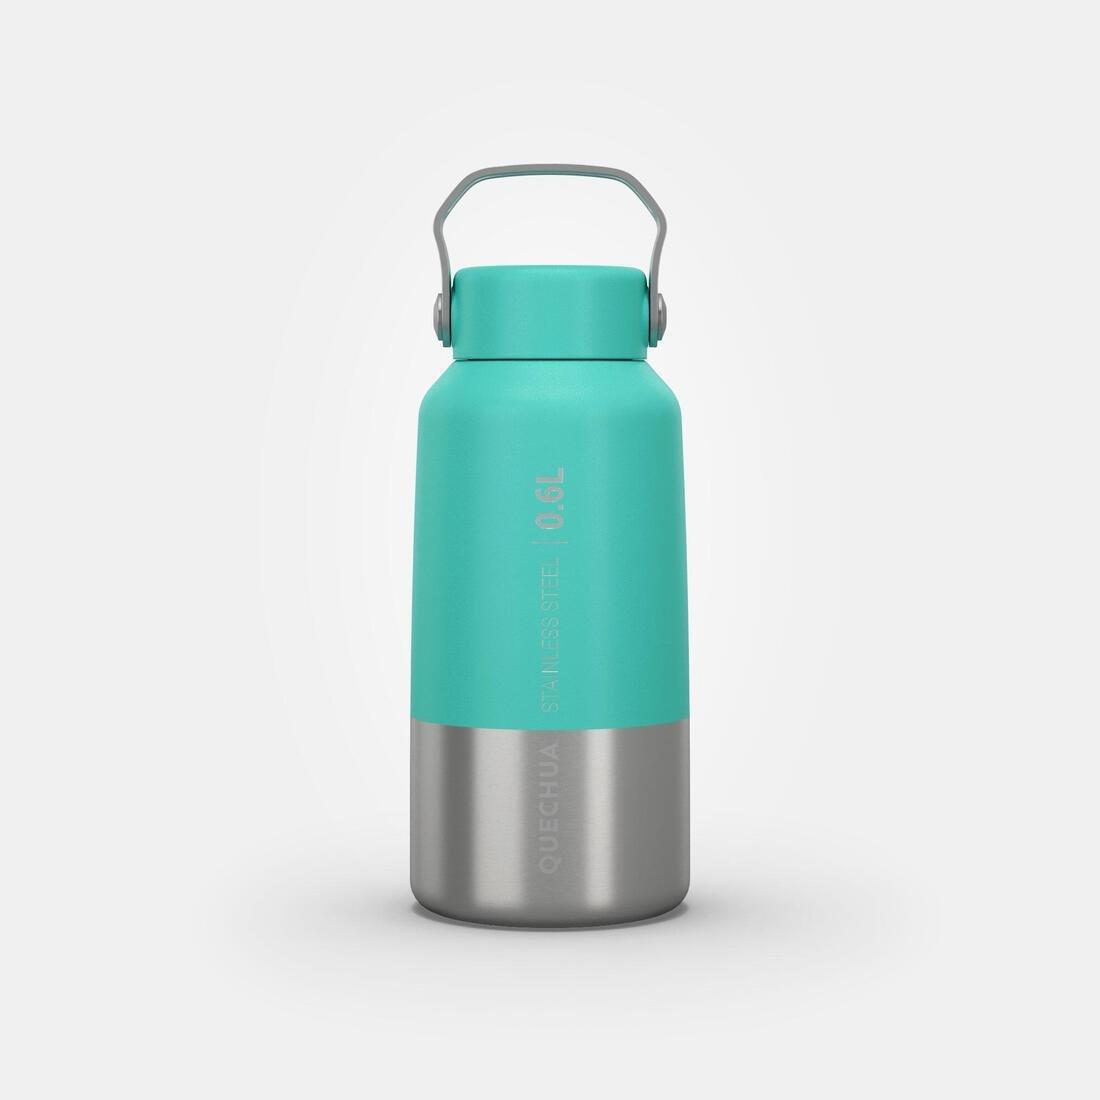 QUECHUA - Stainless Steel Hiking Flask with Screw Cap MH100, Grey